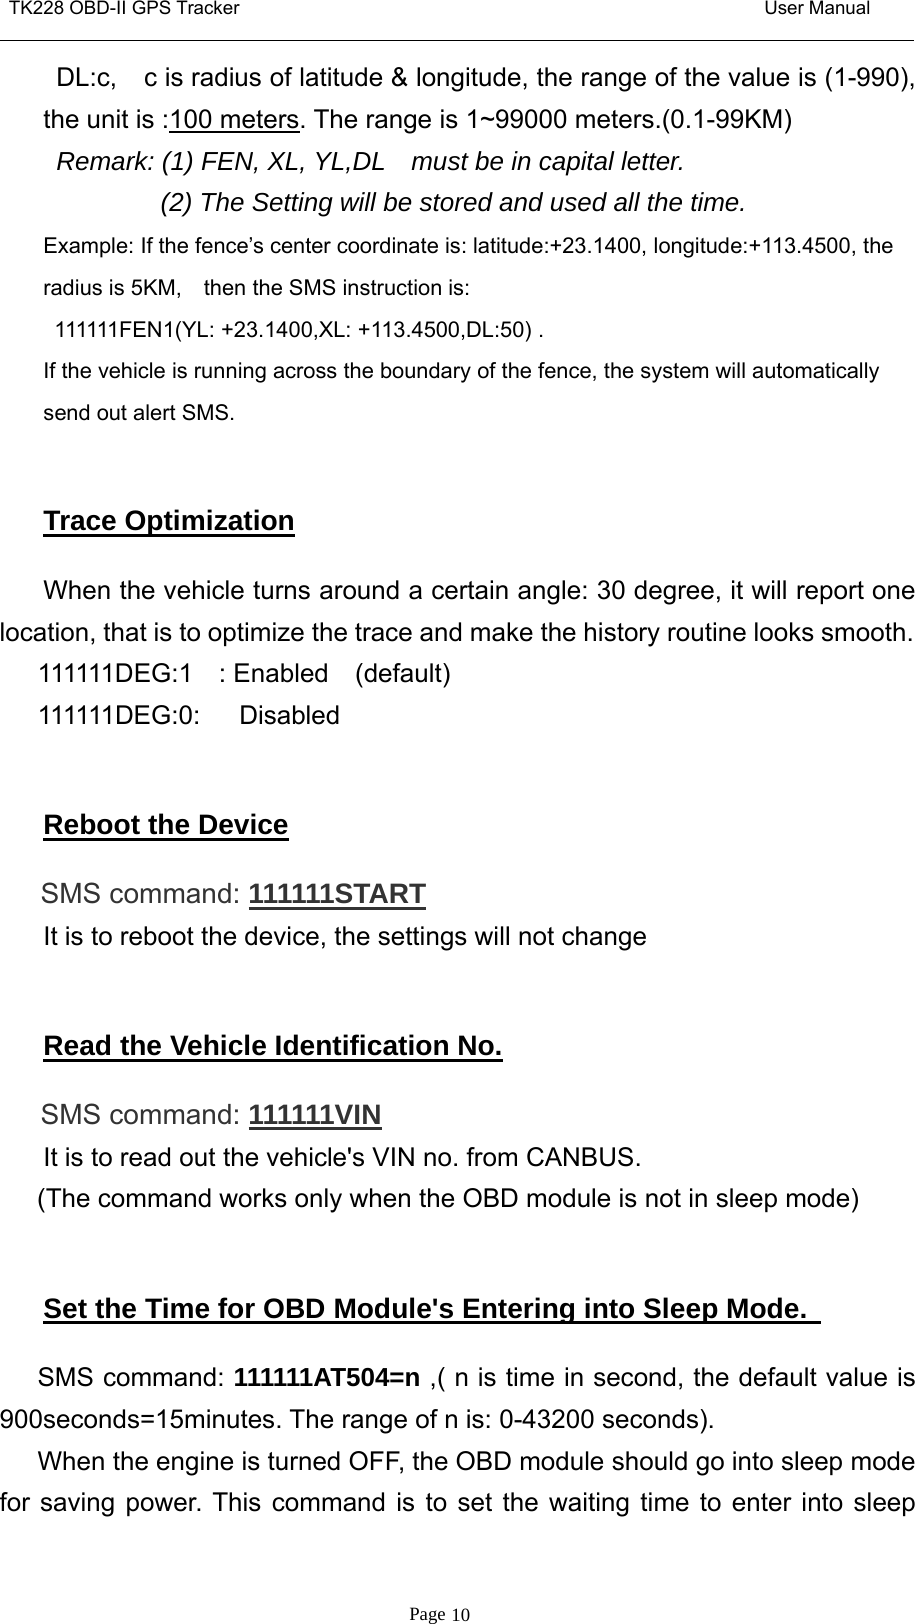 TK228 OBD-II GPS Tracker User ManualPage 10DL:c, c is radius of latitude &amp; longitude, the range of the value is (1-990),the unit is :100 meters. The range is 1~99000 meters.(0.1-99KM)Remark: (1) FEN, XL, YL,DL must be in capital letter.(2) The Setting will be stored and used all the time.Example: If the fence’s center coordinate is: latitude:+23.1400, longitude:+113.4500, theradius is 5KM, then the SMS instruction is:111111FEN1(YL: +23.1400,XL: +113.4500,DL:50) .If the vehicle is running across the boundary of the fence, the system will automaticallysend out alert SMS.Trace OptimizationWhen the vehicle turns around a certain angle: 30 degree, it will report onelocation, that is to optimize the trace and make the history routine looks smooth.111111DEG:1 : Enabled (default)111111DEG:0: DisabledReboot the DeviceSMS command: 111111STARTIt is to reboot the device, the settings will not changeRead the Vehicle Identification No.SMS command: 111111VINIt is to read out the vehicle&apos;s VIN no. from CANBUS.(The command works only when the OBD module is not in sleep mode)Set the Time for OBD Module&apos;s Entering into Sleep Mode.SMS command: 111111AT504=n ,(nistimeinsecond,thedefaultvalueis900seconds=15minutes. The range of n is: 0-43200 seconds).When the engine is turned OFF, the OBD module should go into sleep modefor saving power. This command is to set the waiting time to enter into sleep